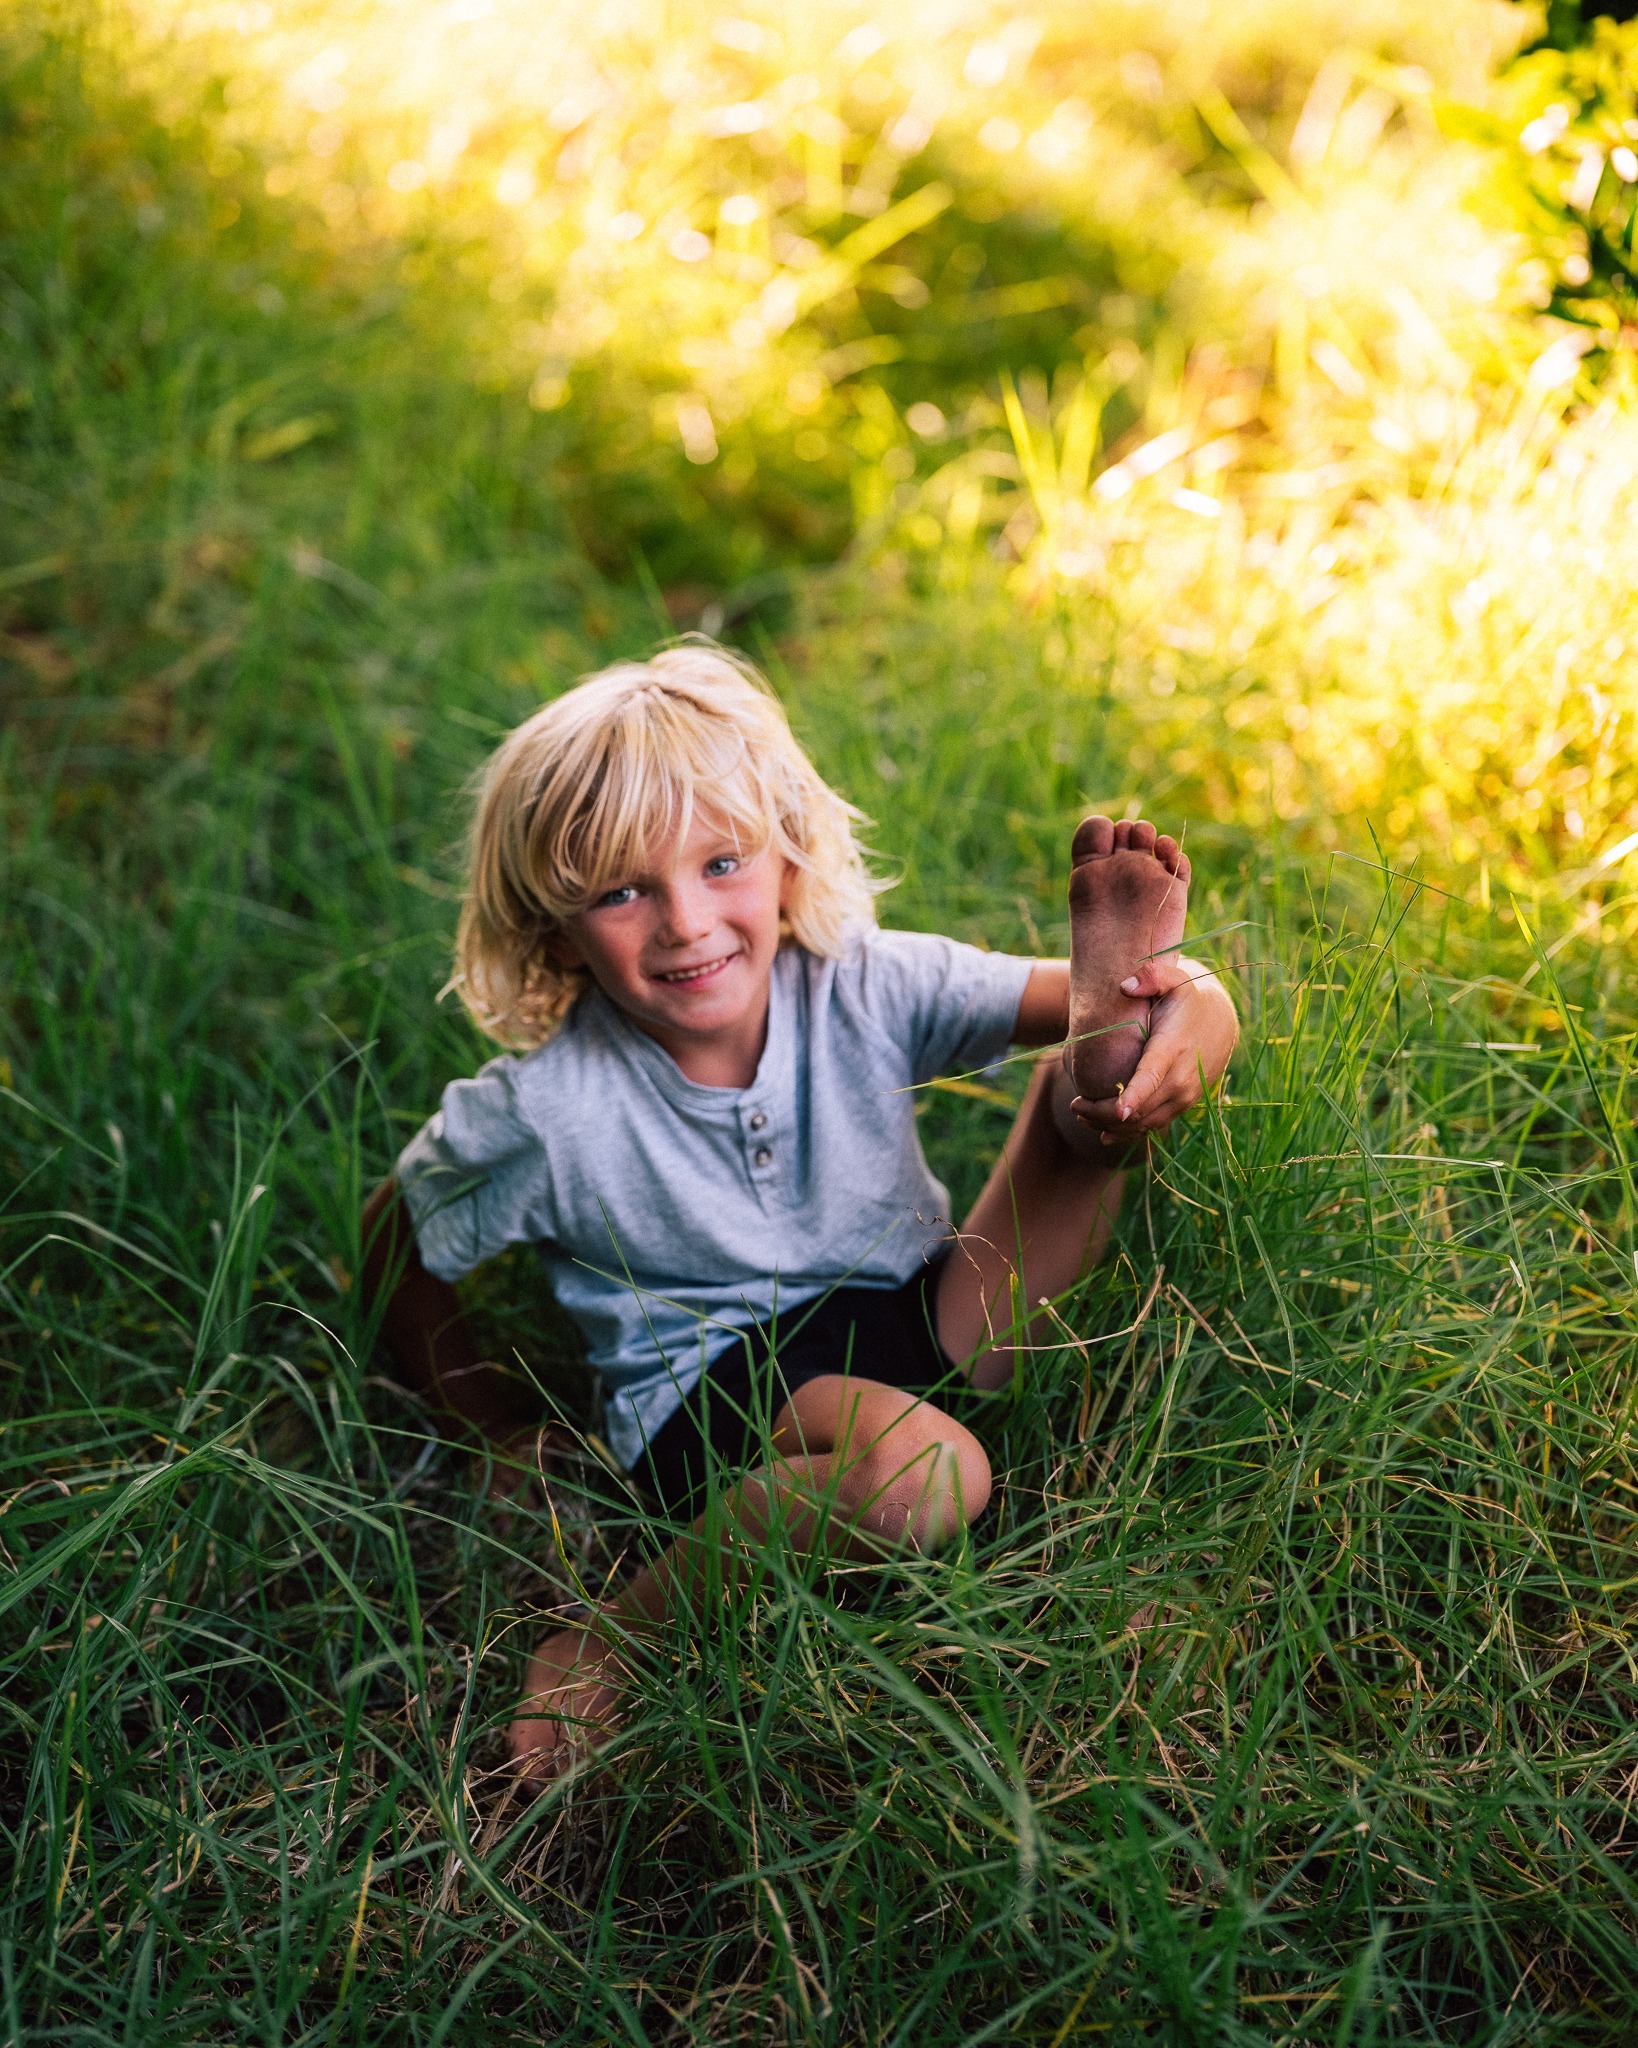 10 Reasons why going barefoot into nature is awesome